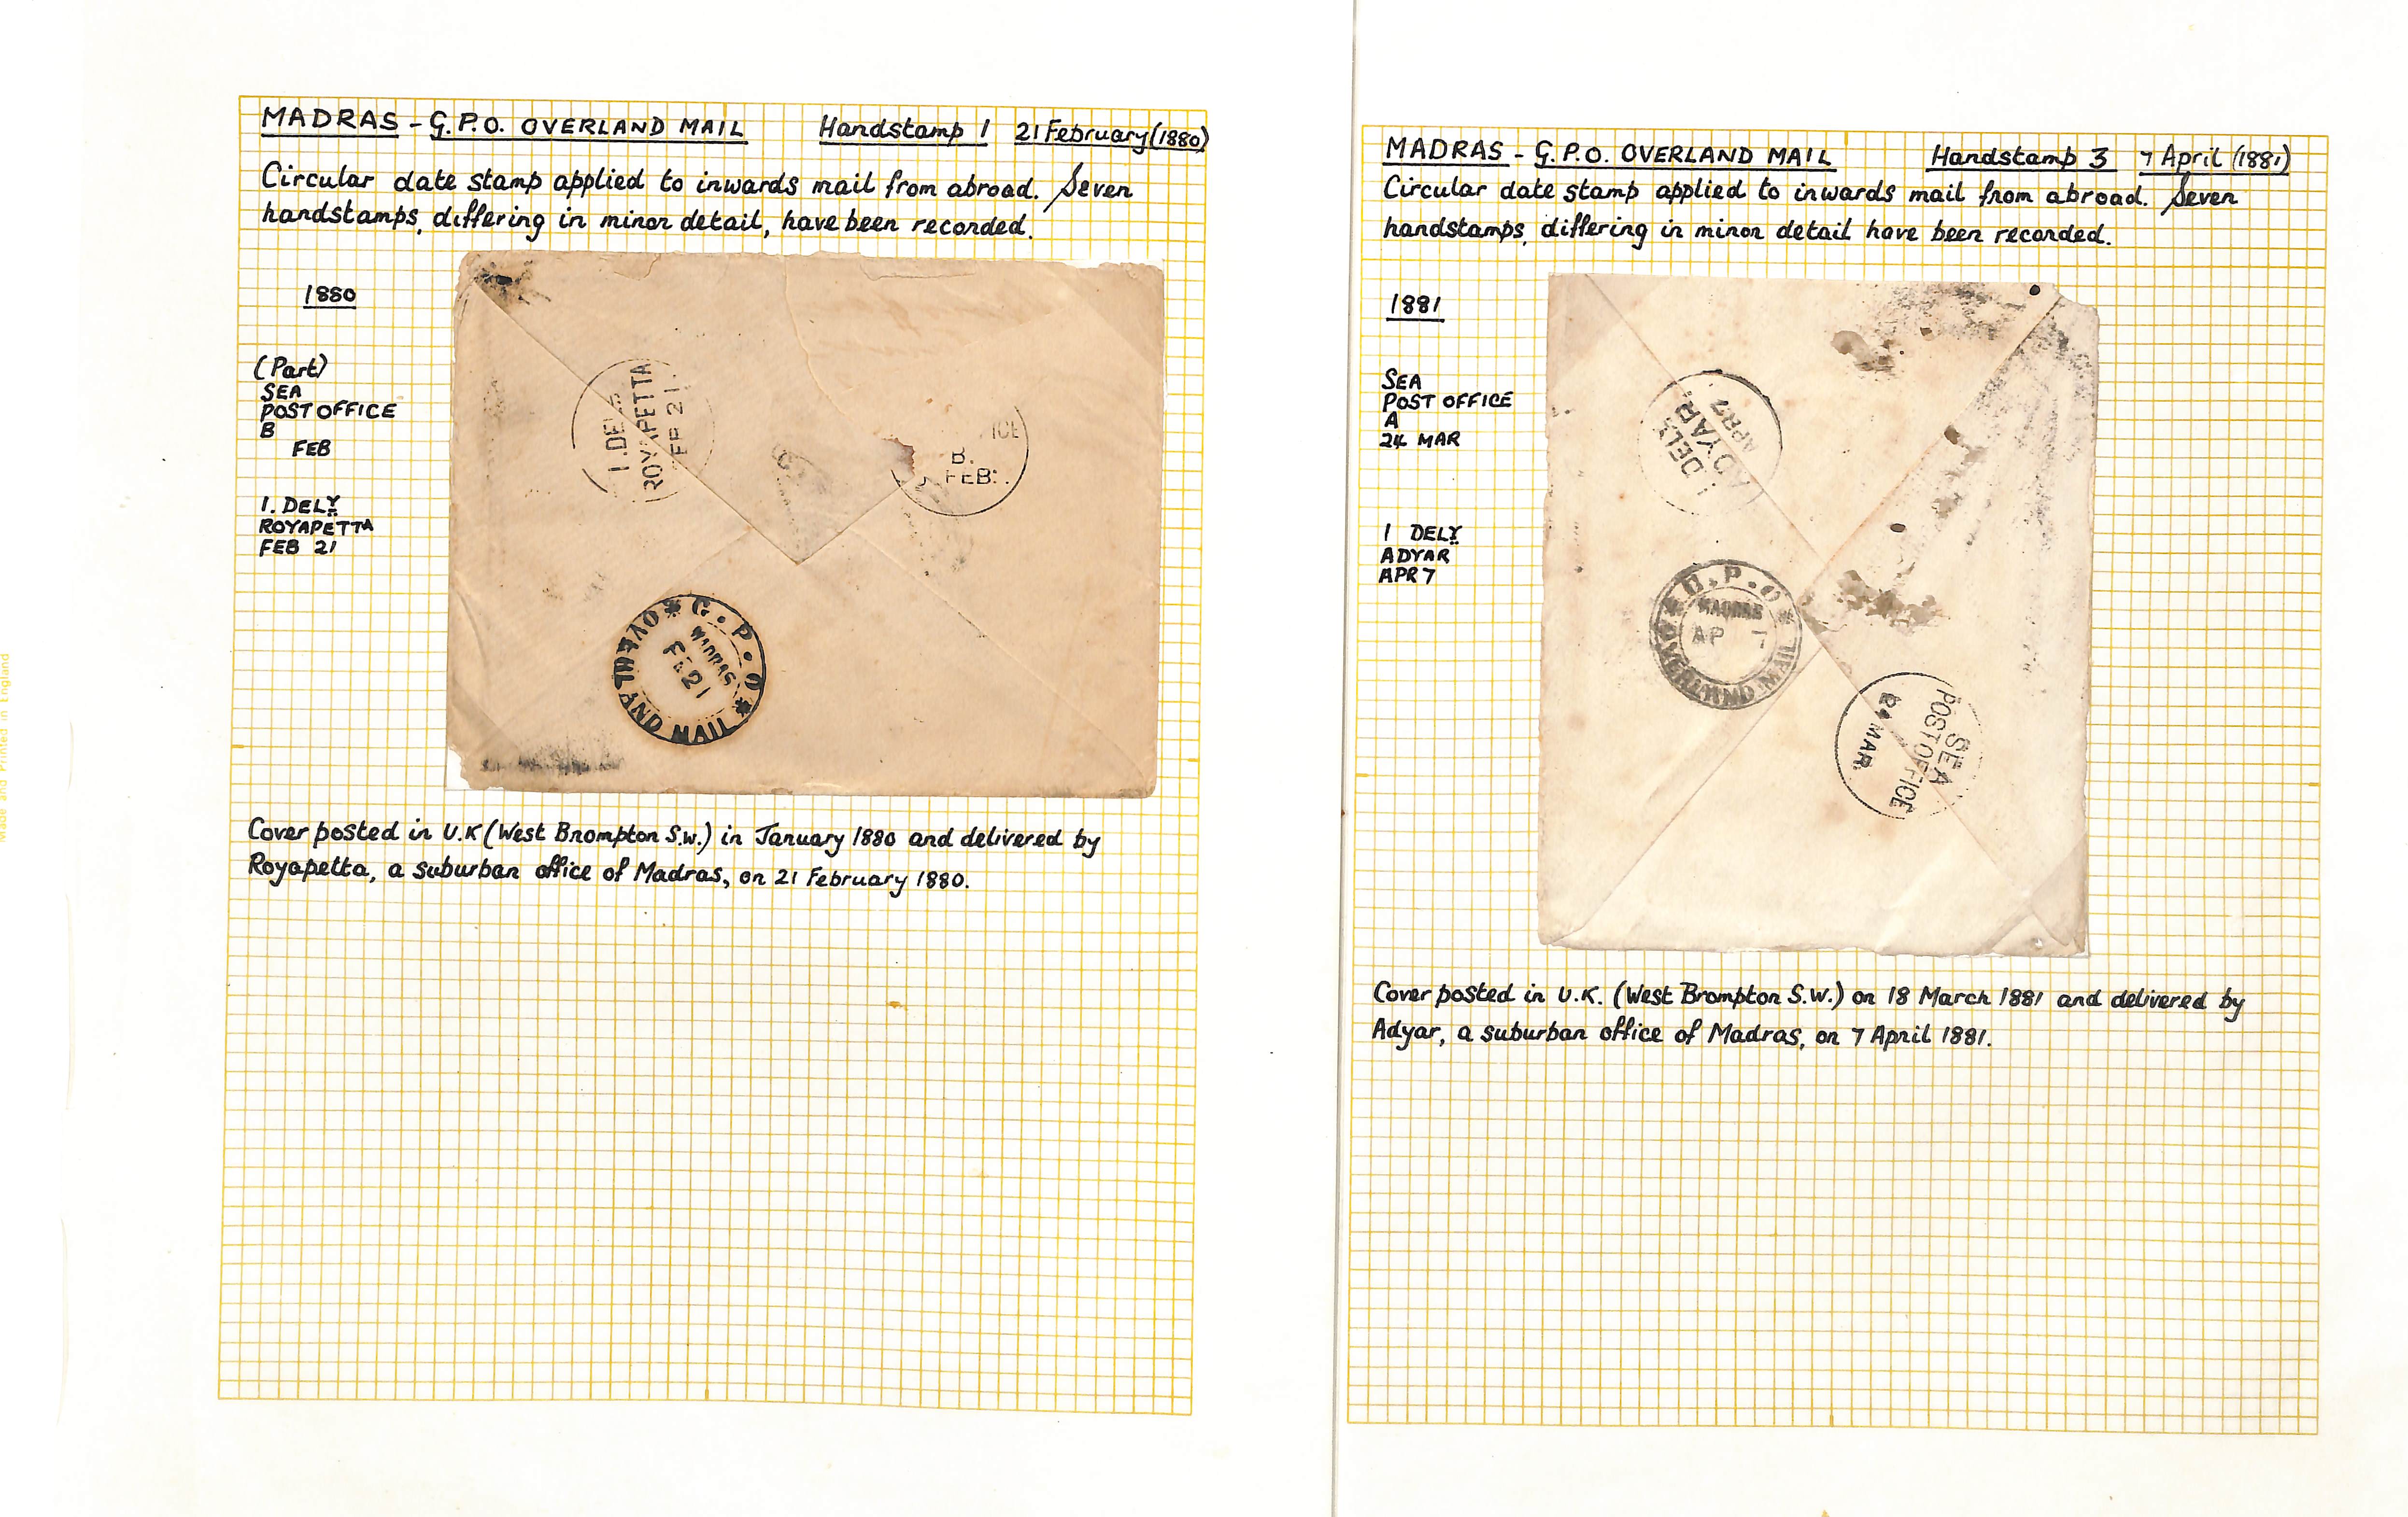 Madras - Overland Mail. 1872-82 Covers from G.B to Madras franked 1/4, 1/- (3), 8d, 6d (2) or 5d (3) - Image 4 of 5